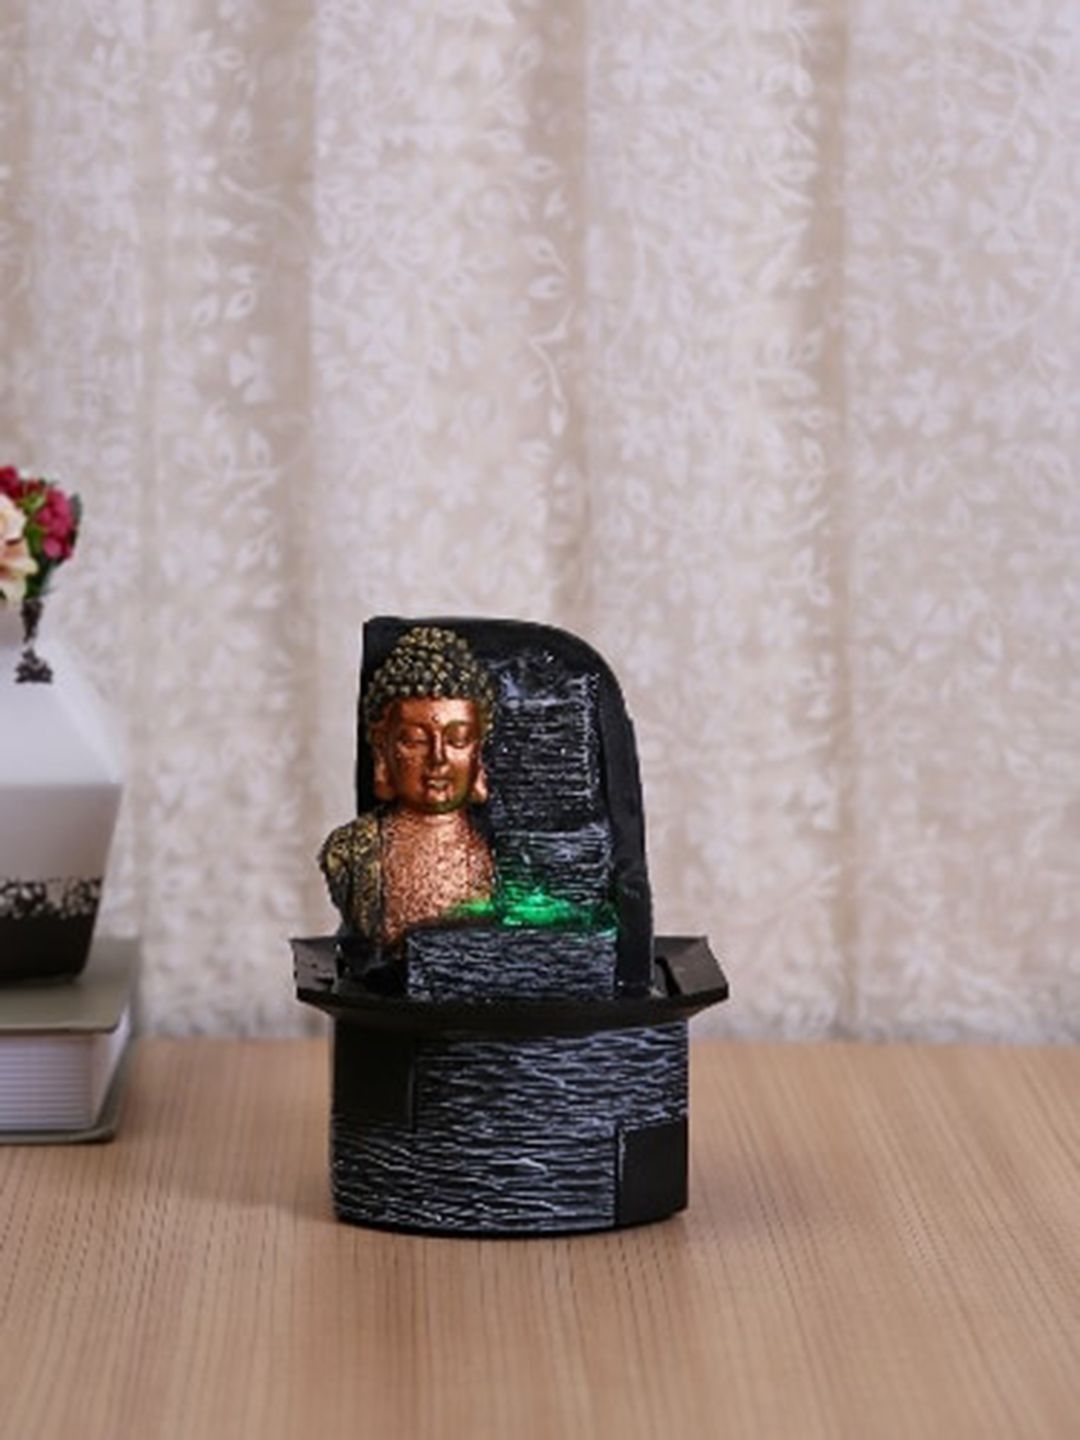 TAYHAA Browm & Black Handcrafted Buddha Water Fountain with Light Price in India